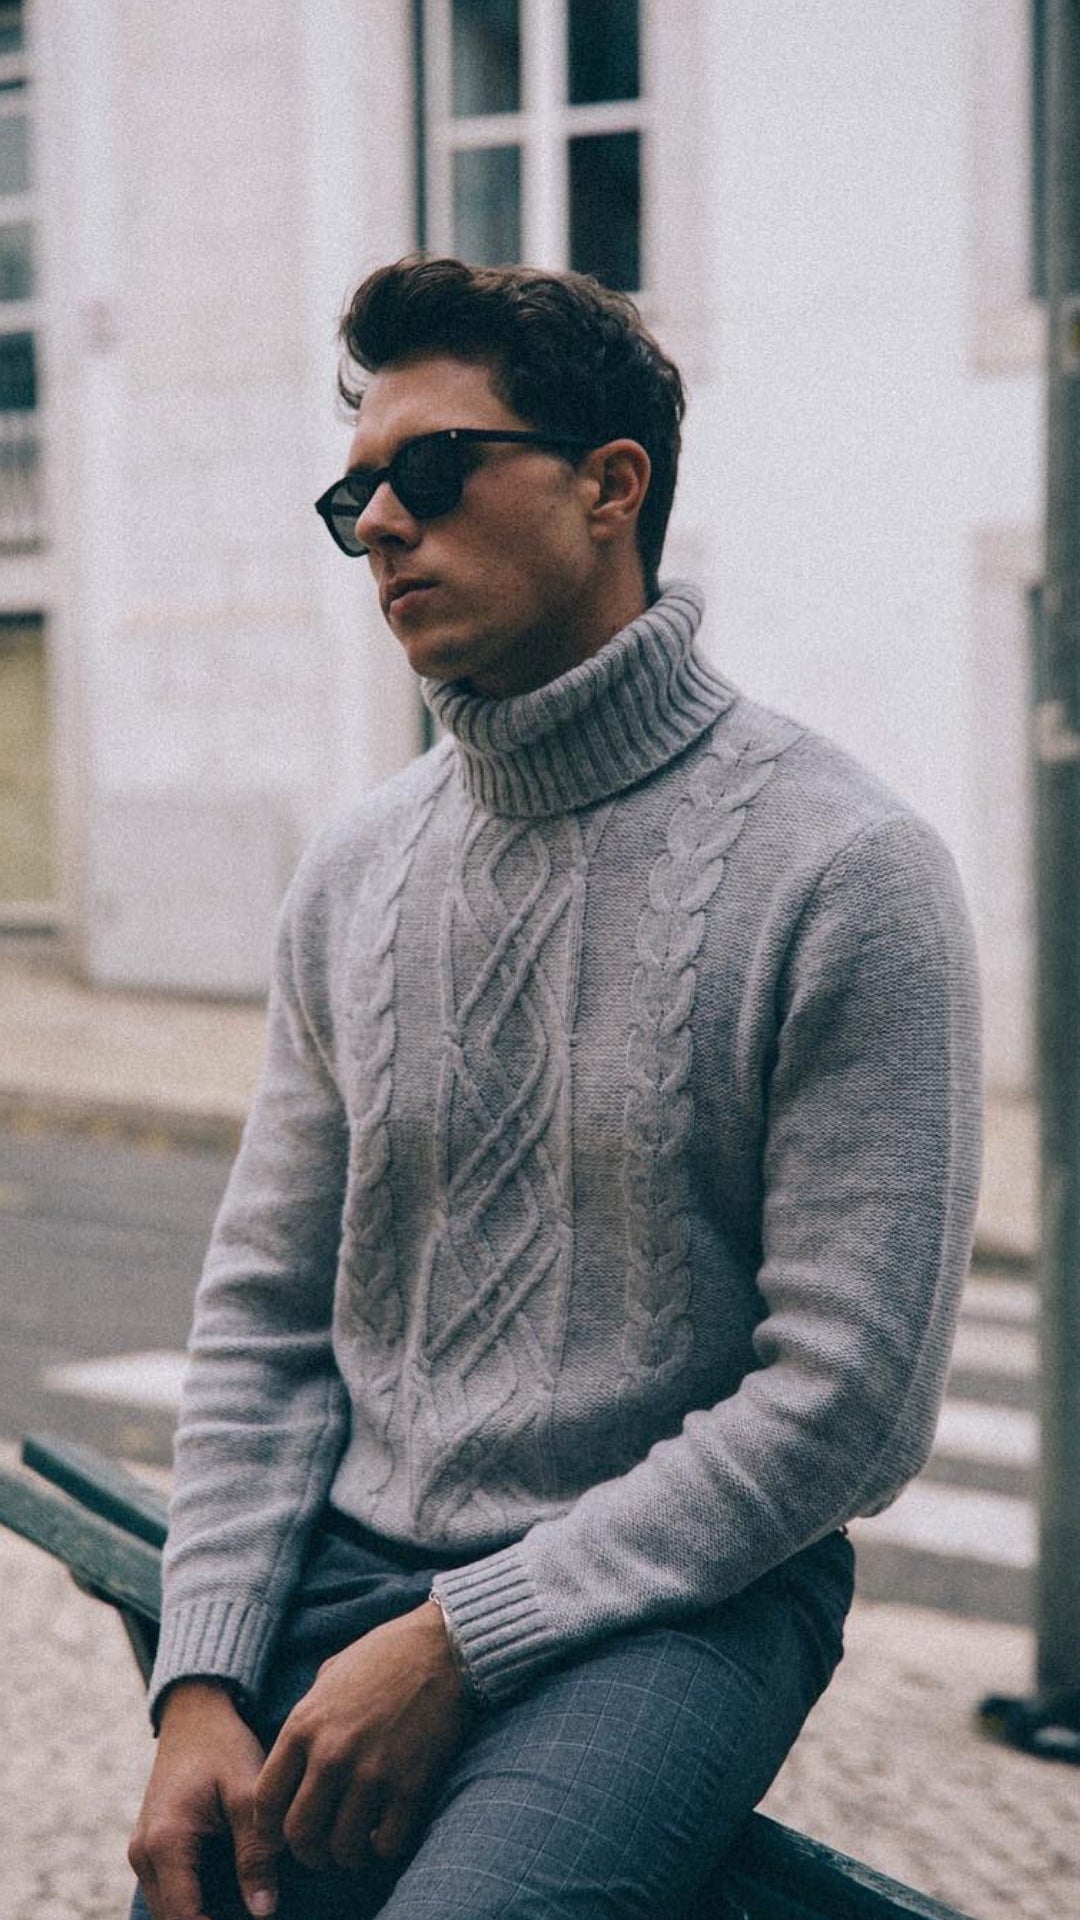 5 Amazing Outfits To Elevate Your Winter Style Game #winterstyle #mensfashion #streetstyle